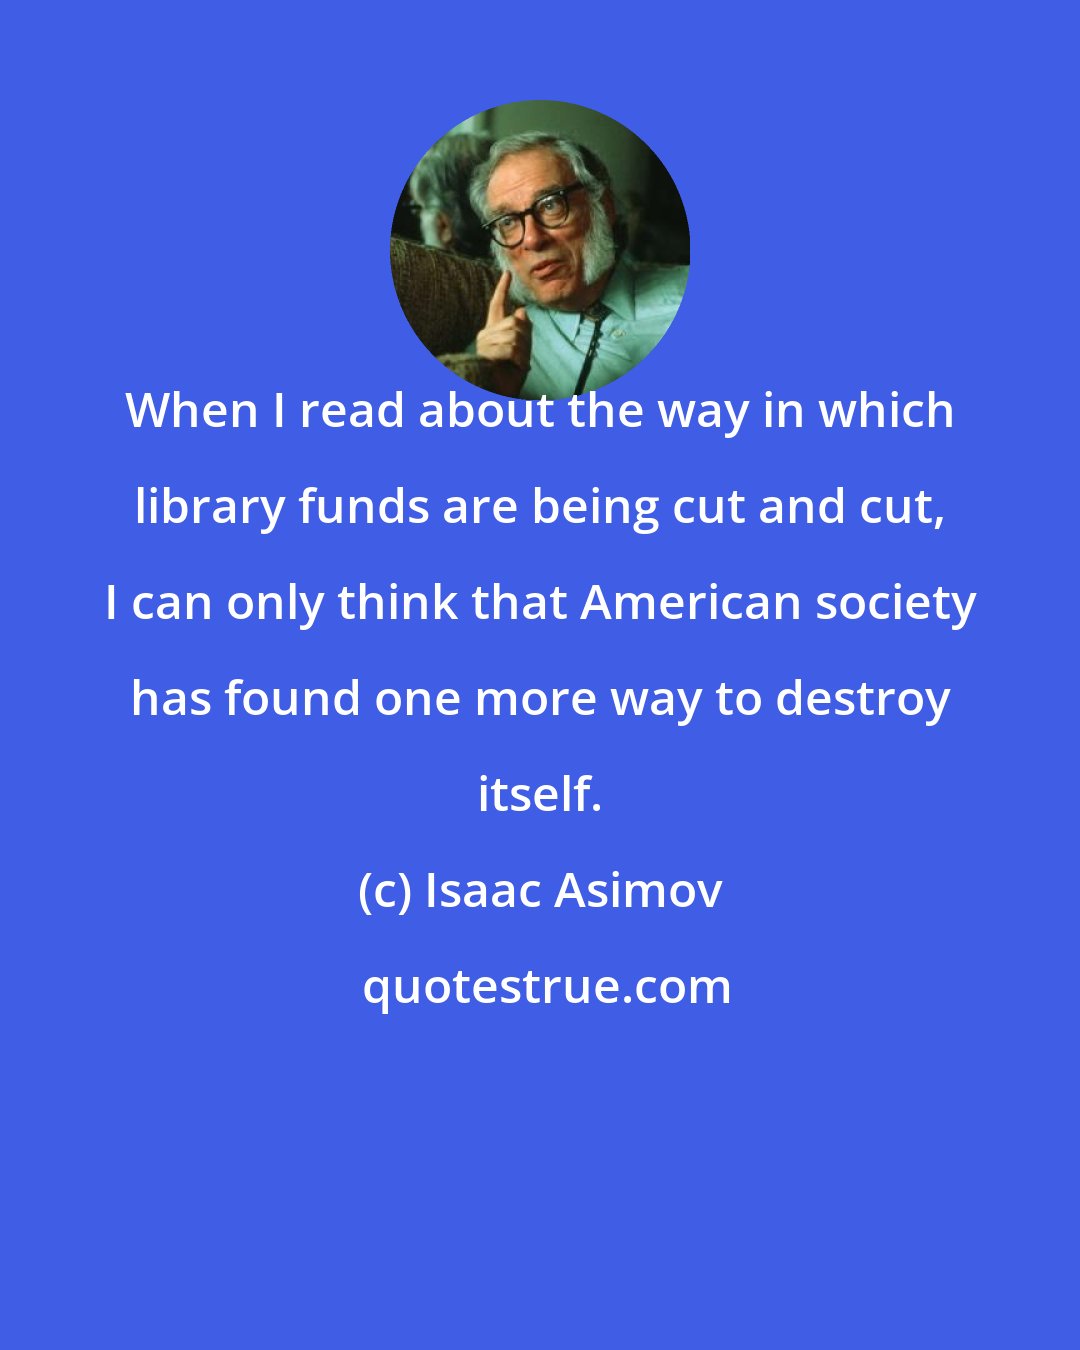 Isaac Asimov: When I read about the way in which library funds are being cut and cut, I can only think that American society has found one more way to destroy itself.